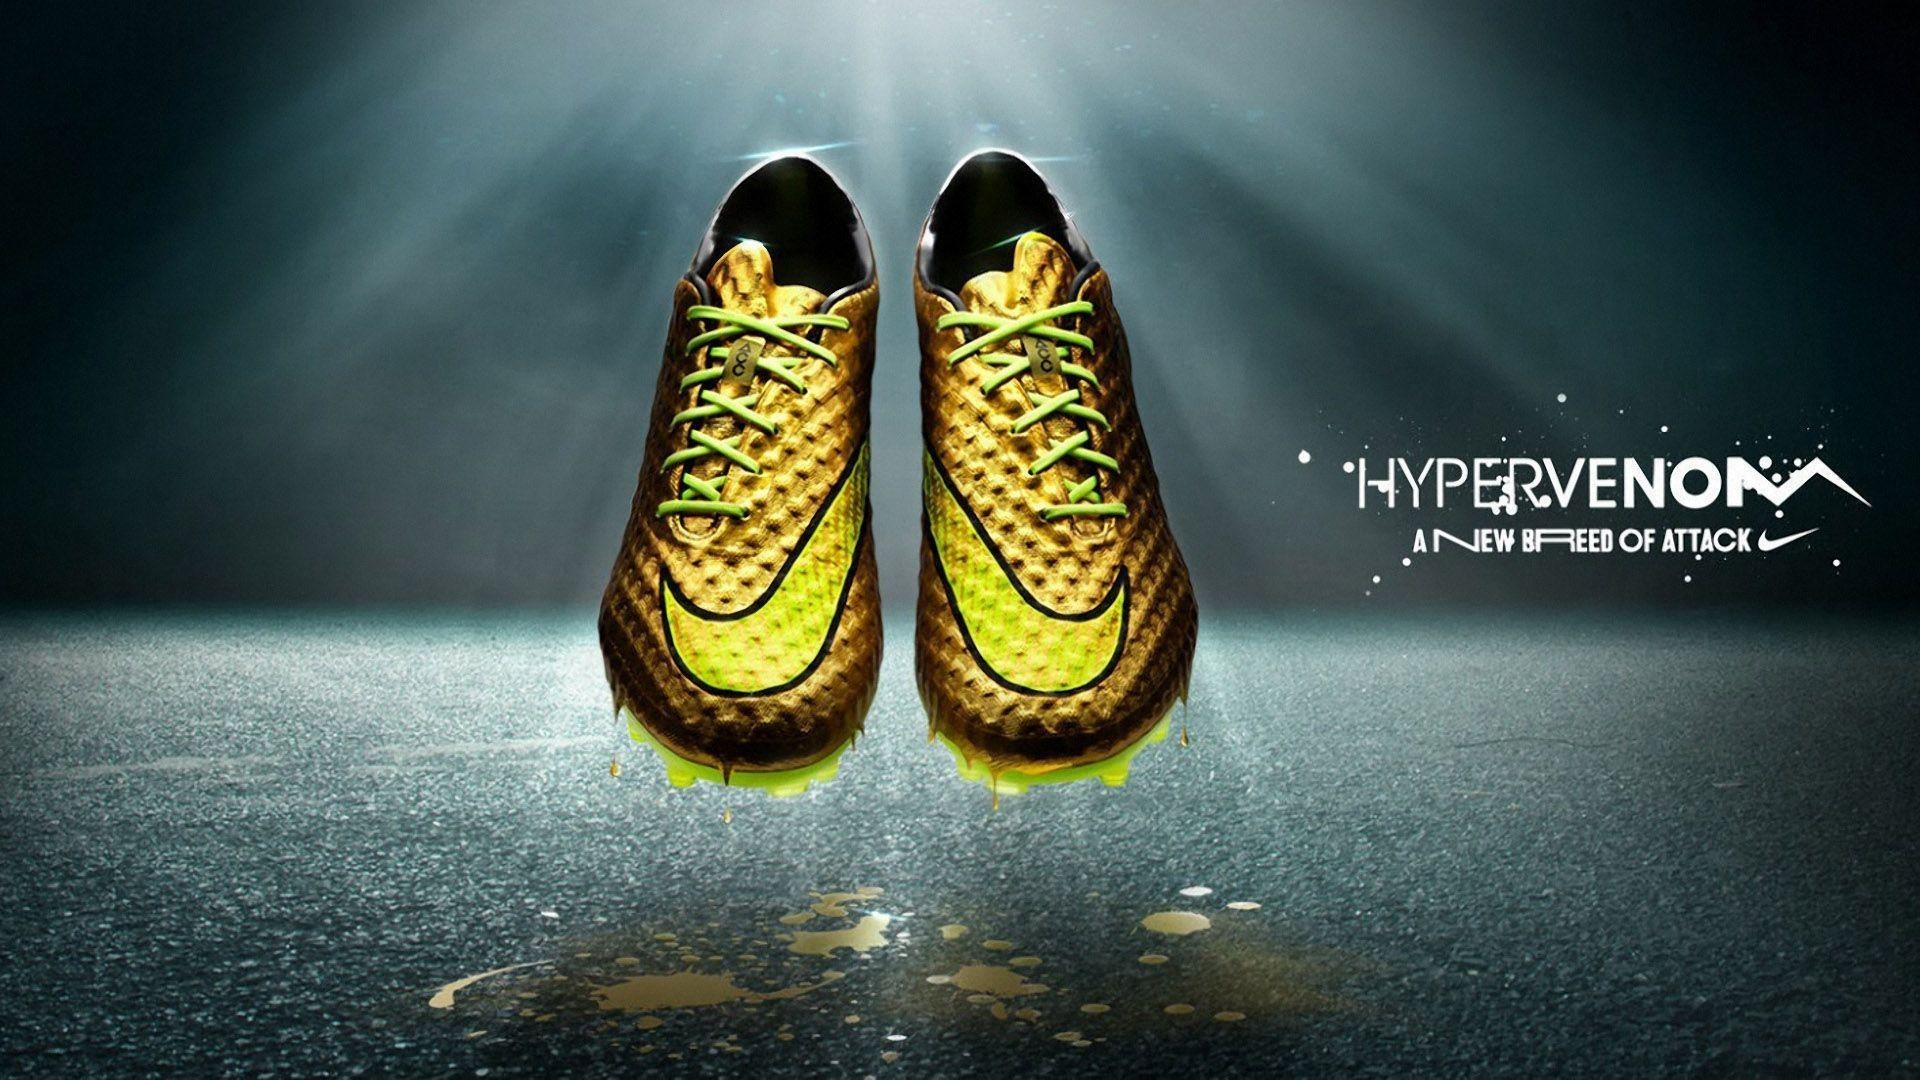 Gold Nike Wallpapers